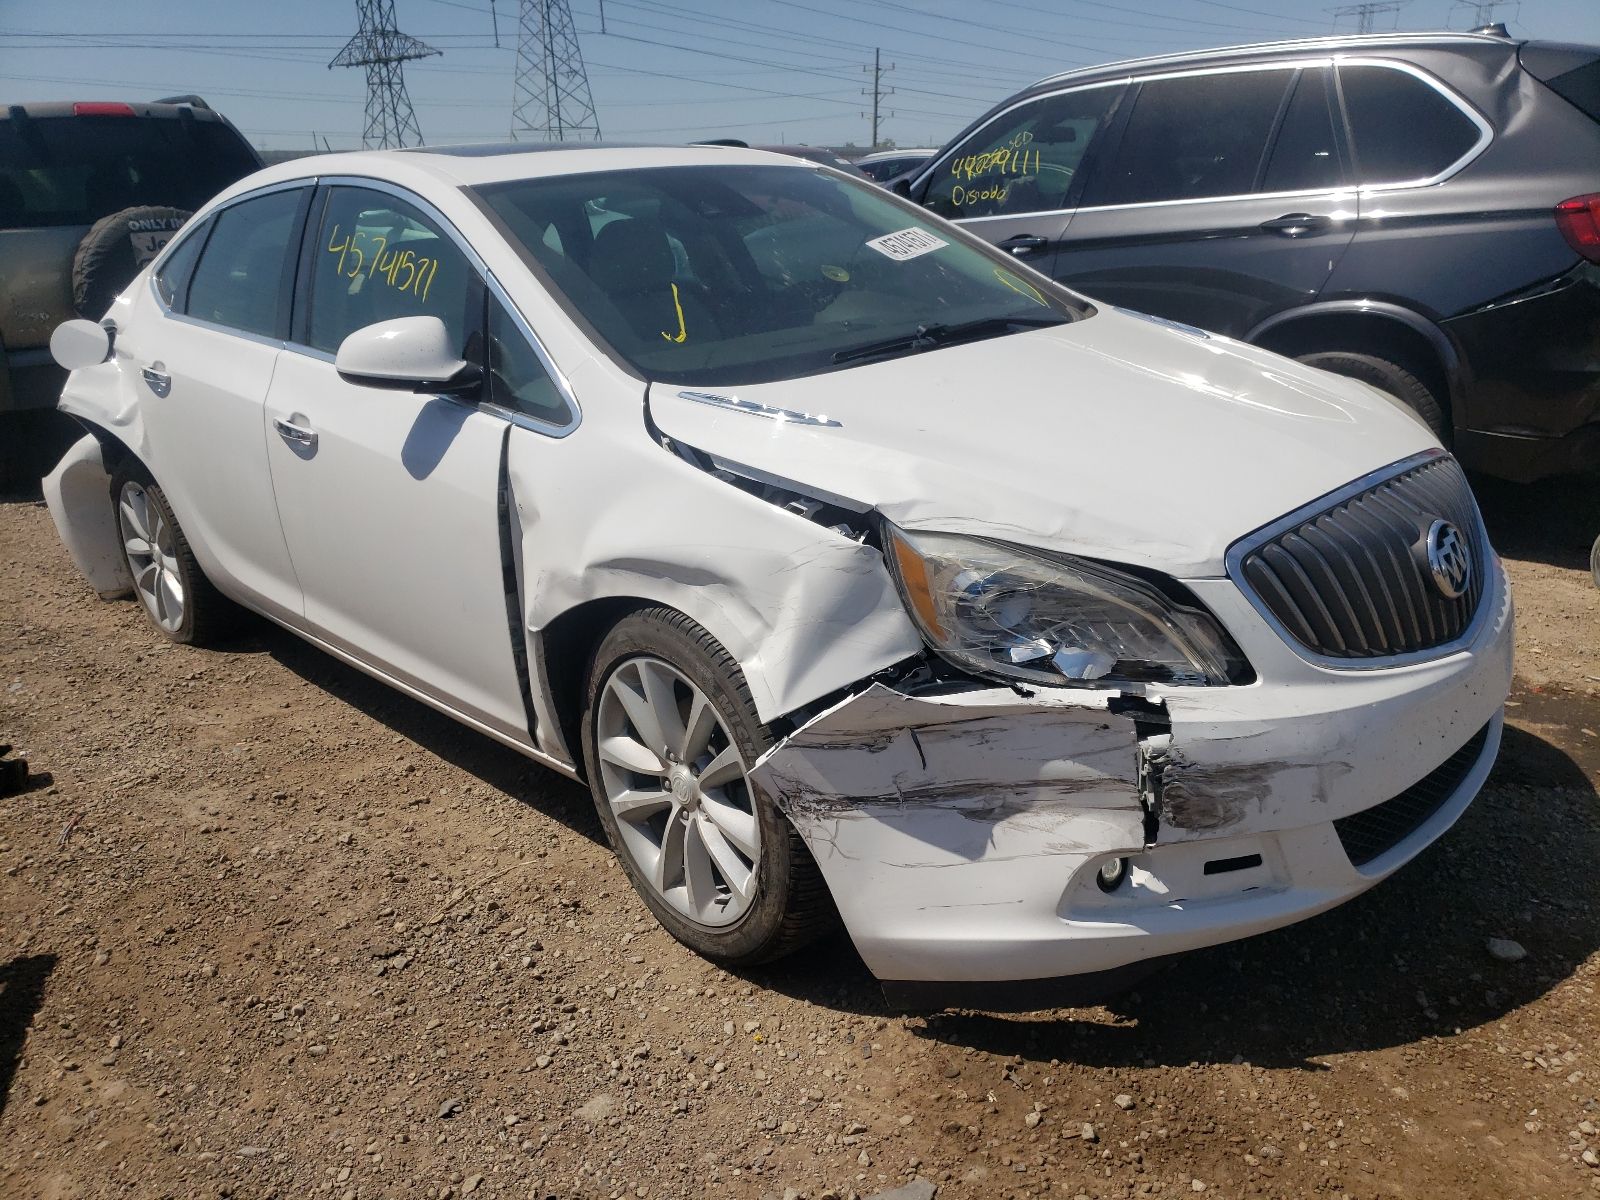 1 of 1G4PS5SKXE4102857 Buick 2014